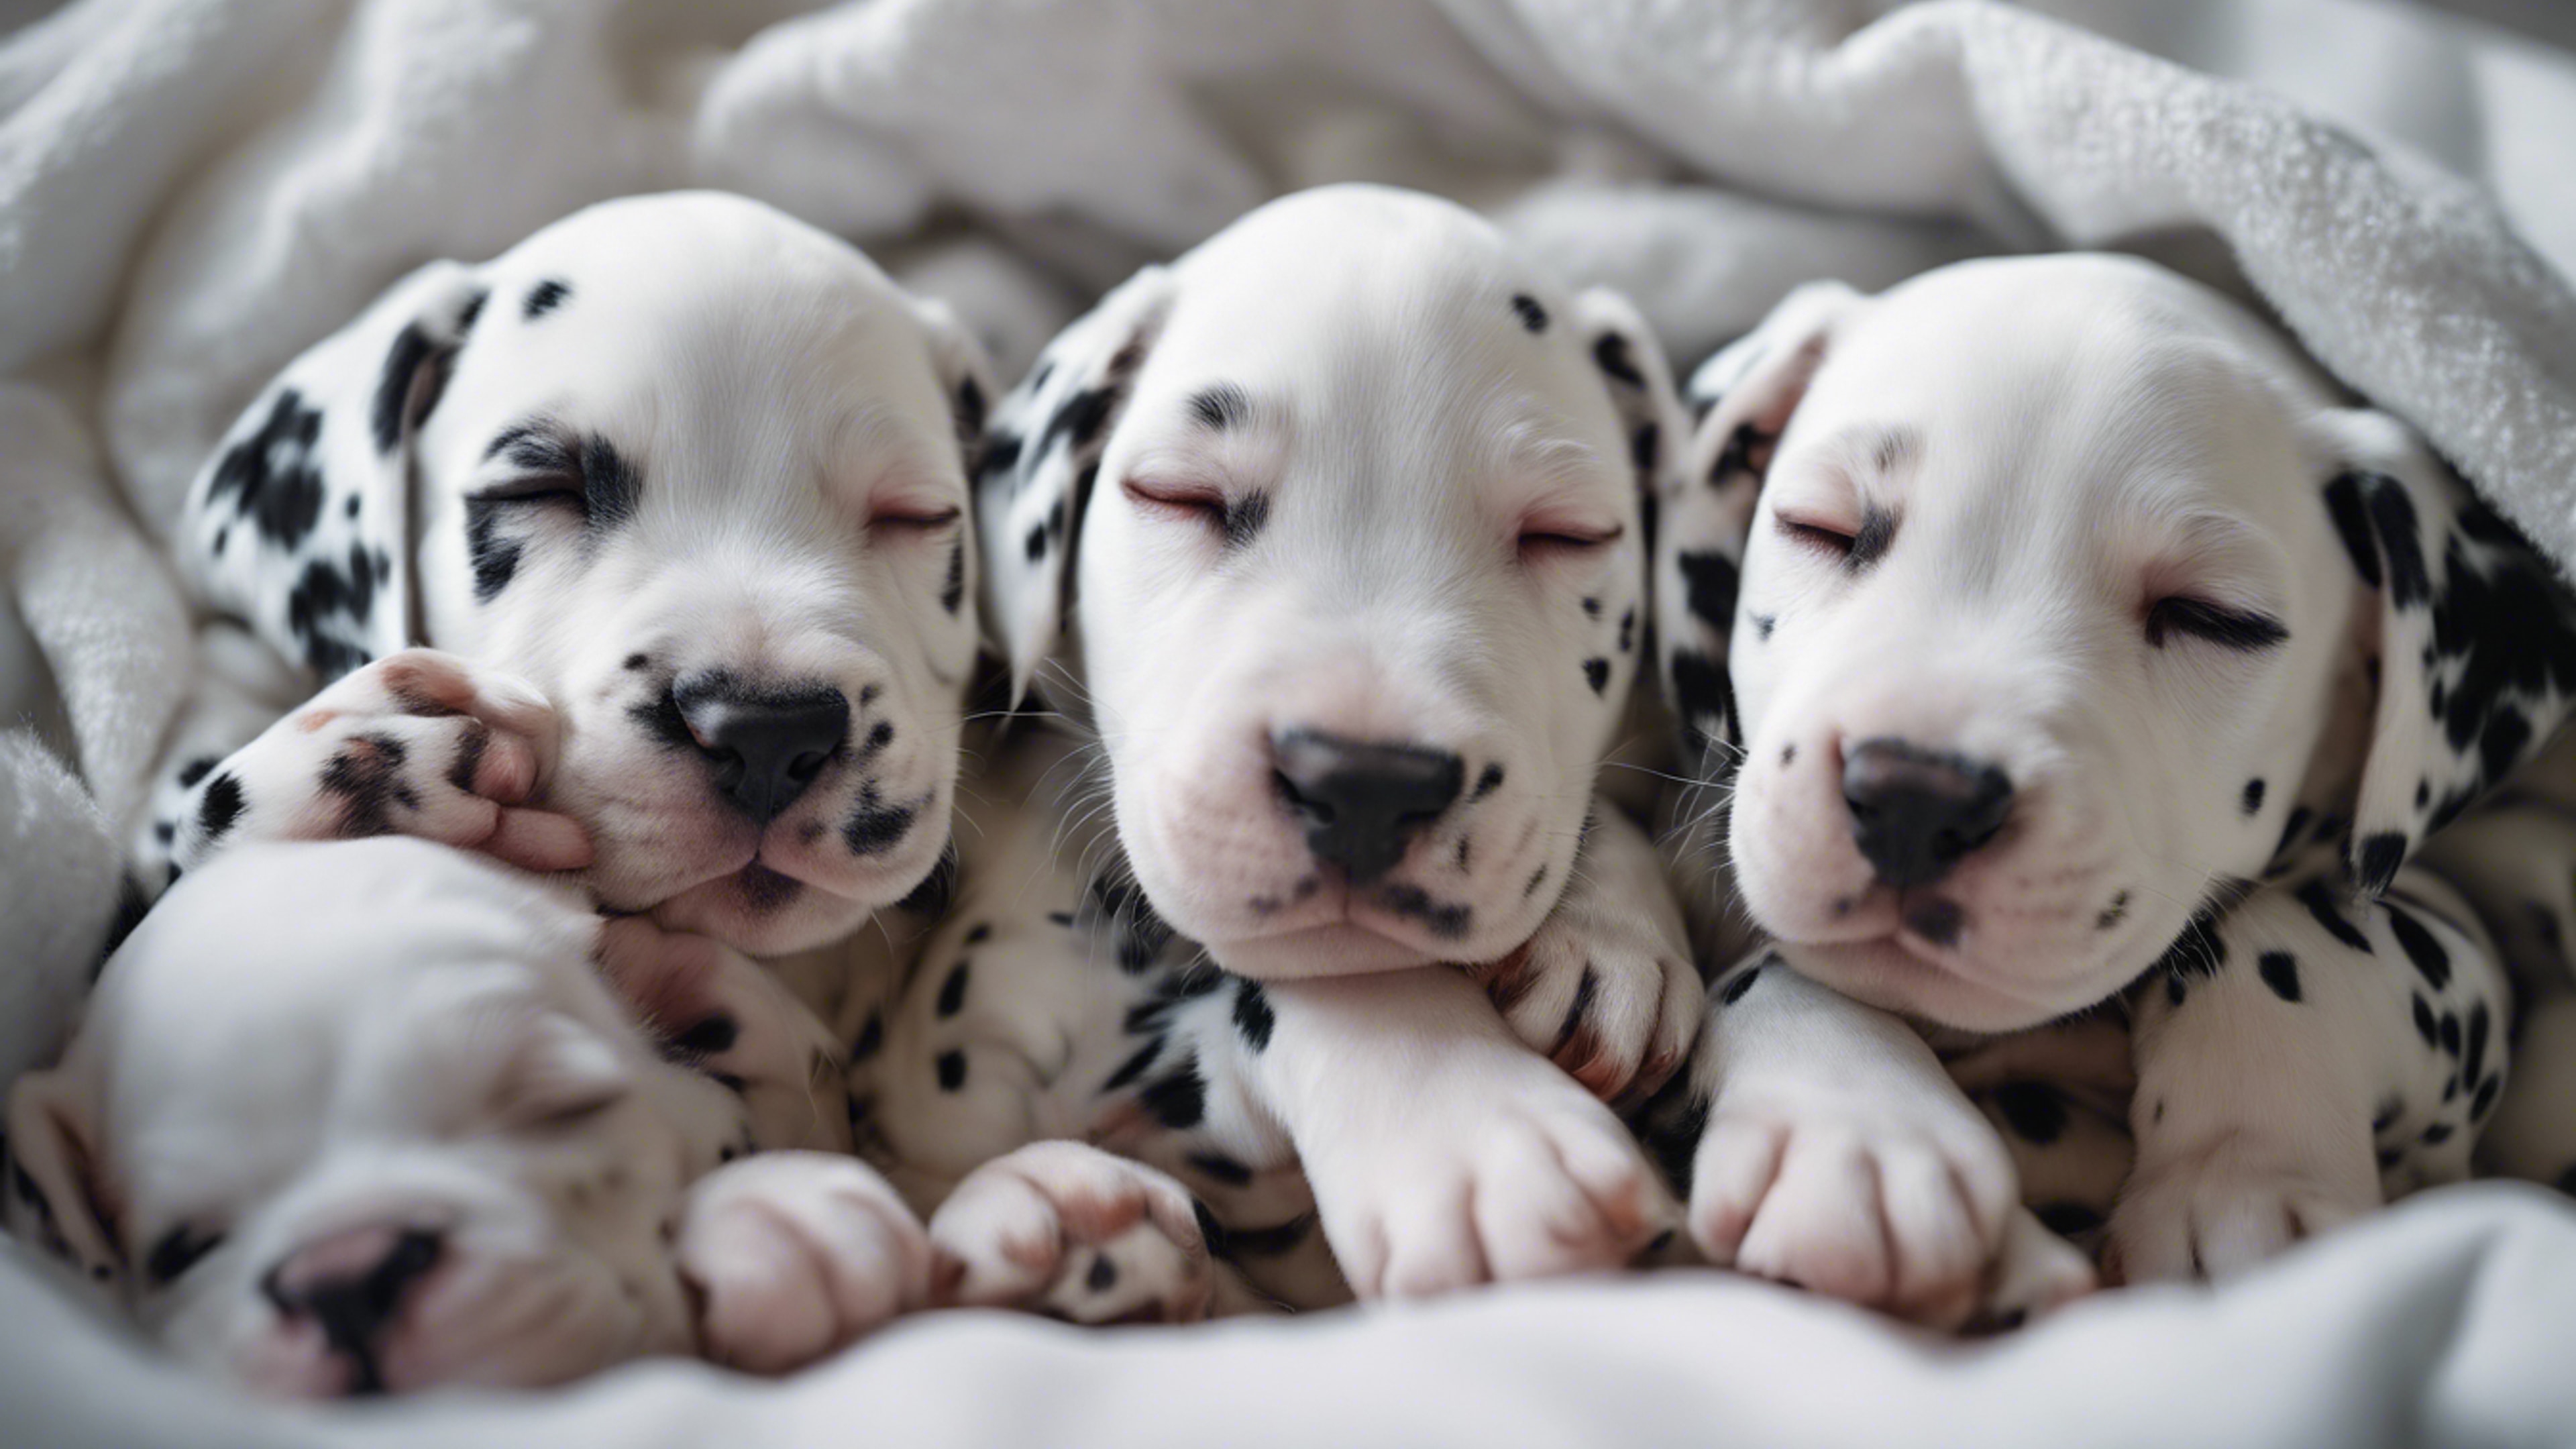 A cluster of sleeping Dalmatian puppies under a cozy white blanket in a nursery room. Tapet[4a5dc312c1f344509ca9]